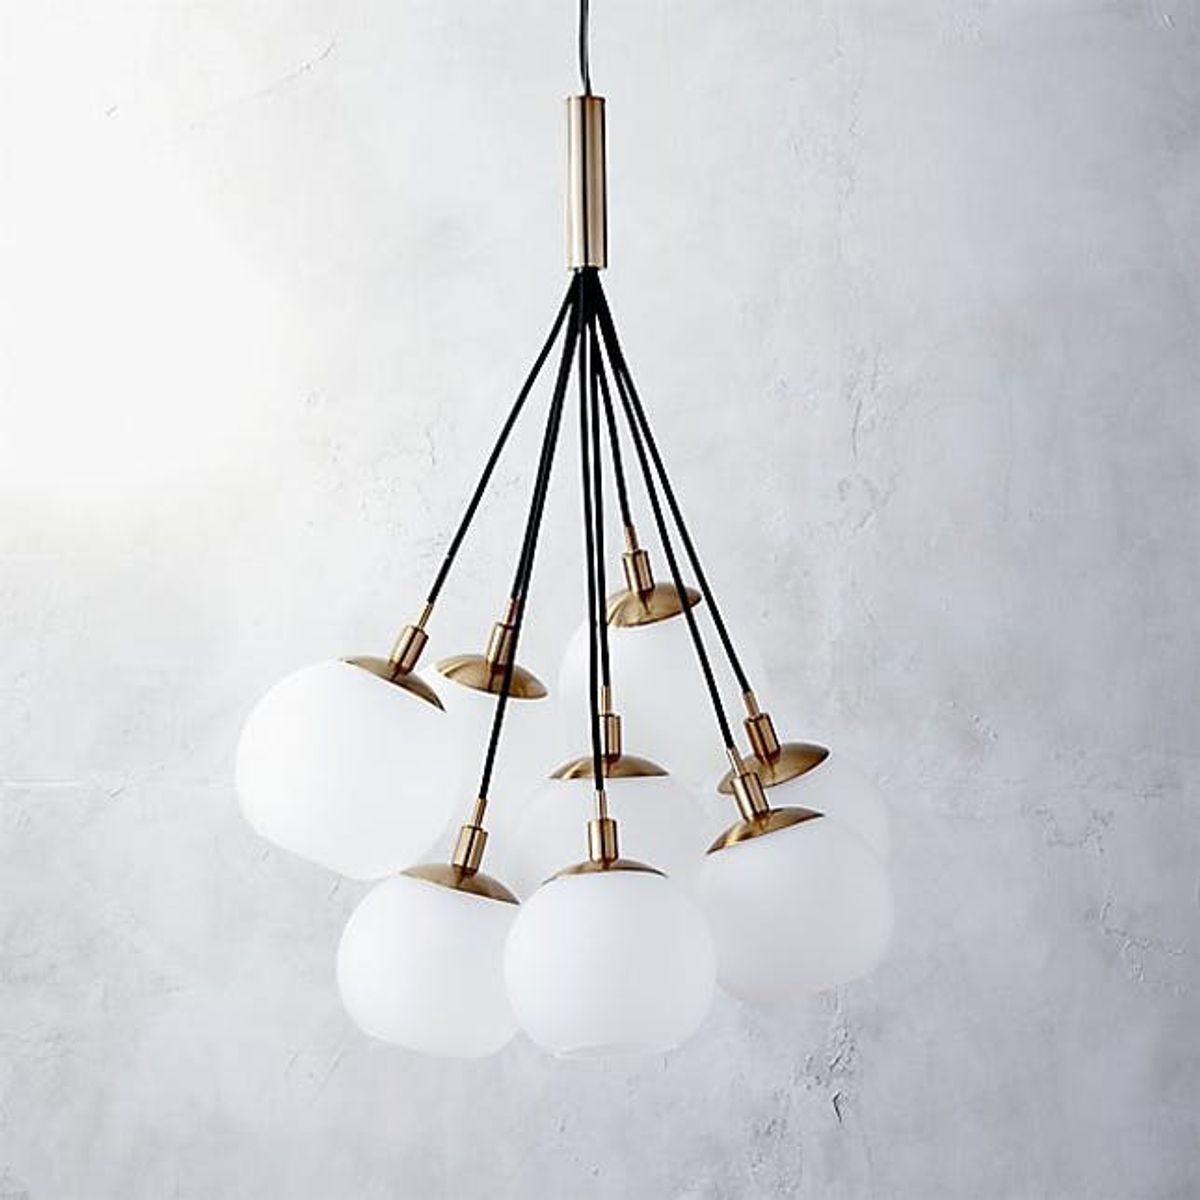 Check Out the Cluster Pendant Lights That Are Taking Over Instagram